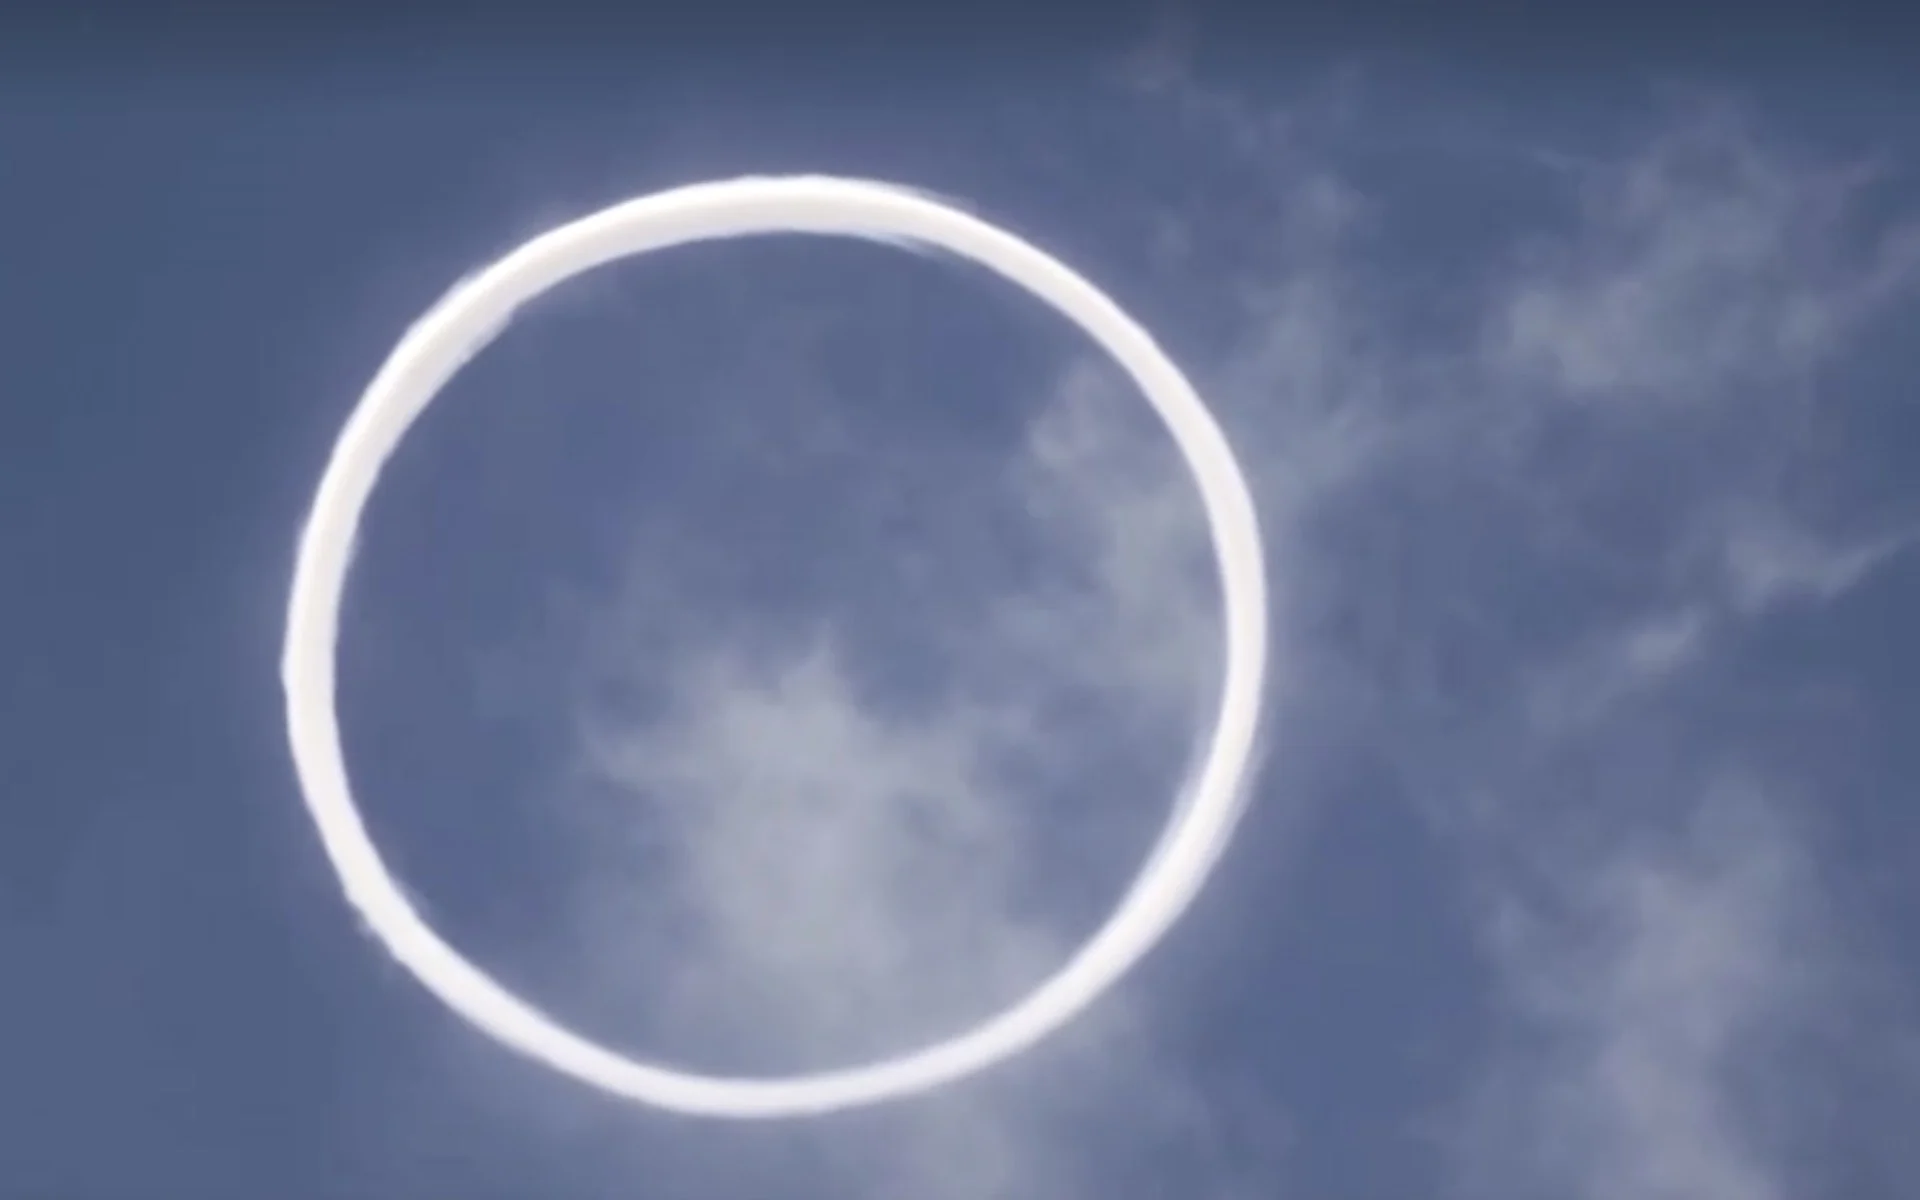 Mount Etna's 'Lady of the Rings' delights visitors with riveting vortex circles